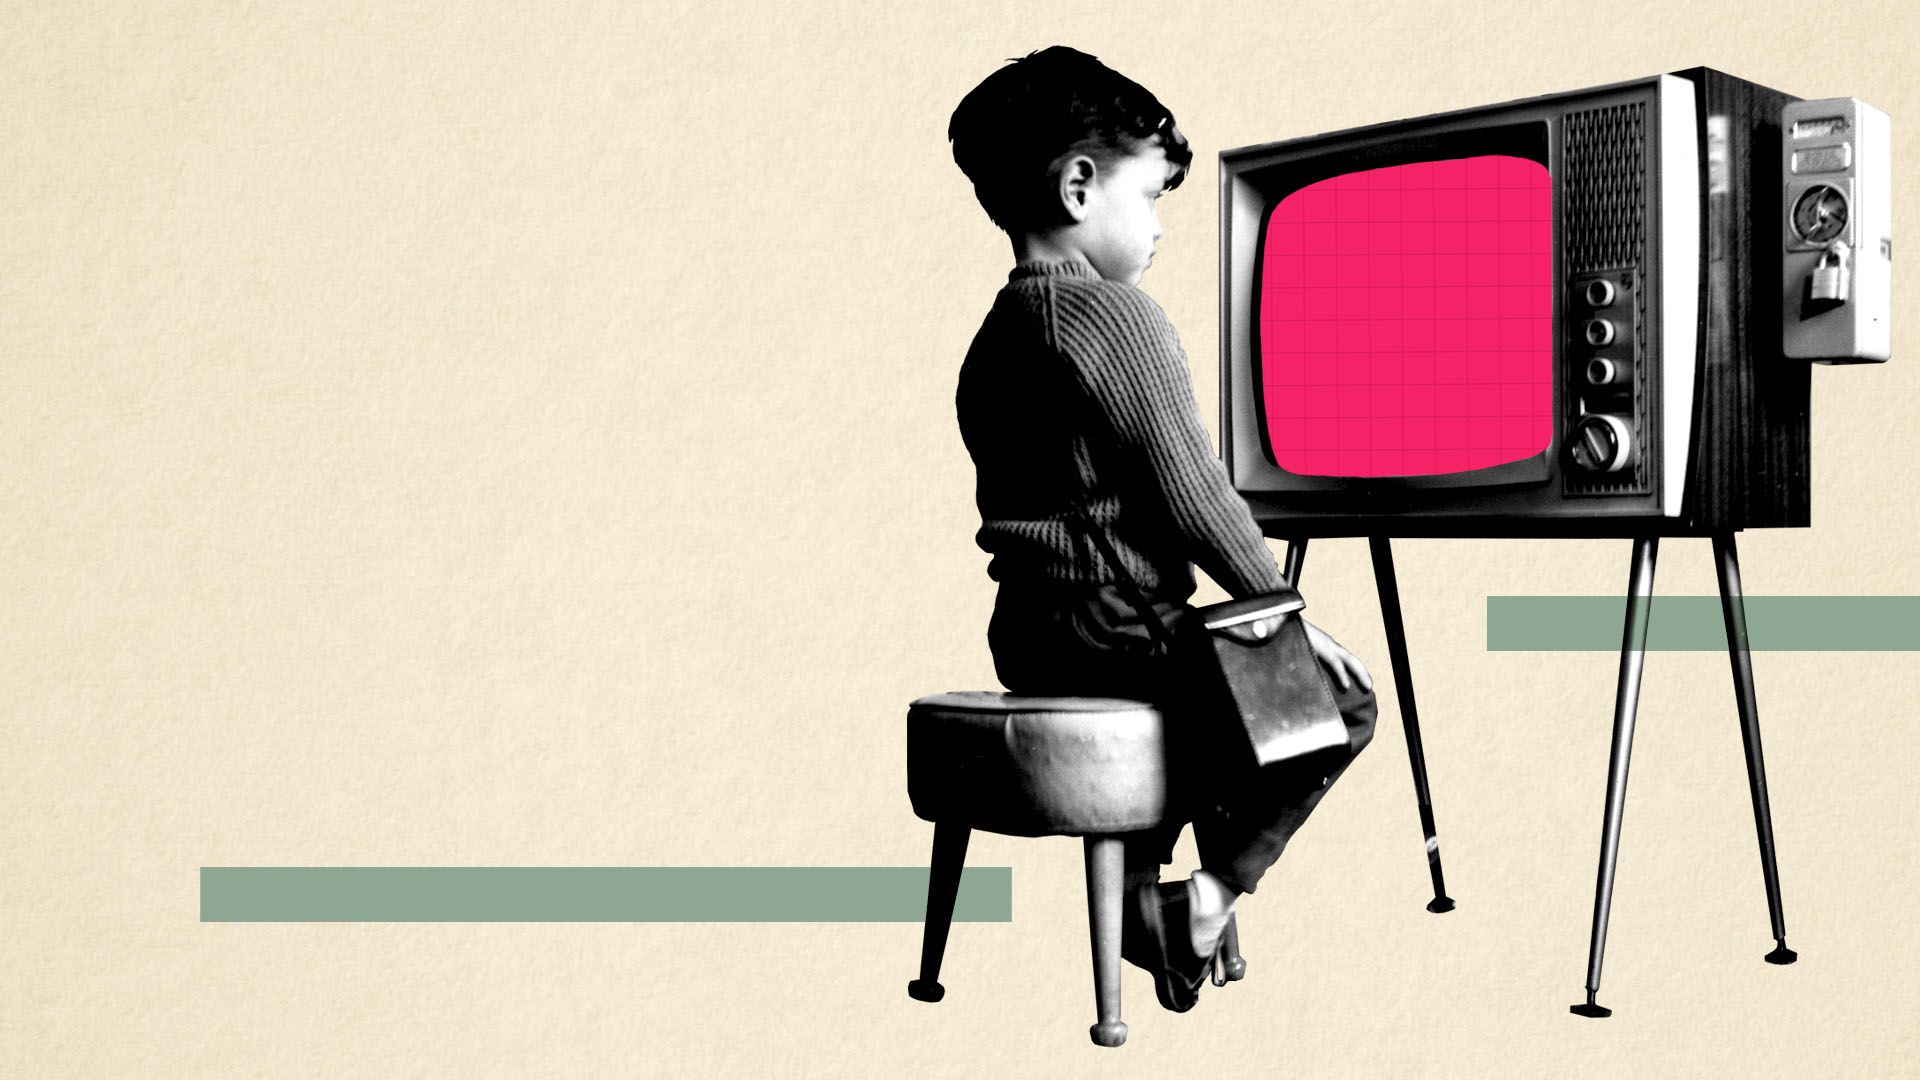 Illustration of a vintage photo of a young boy watching television